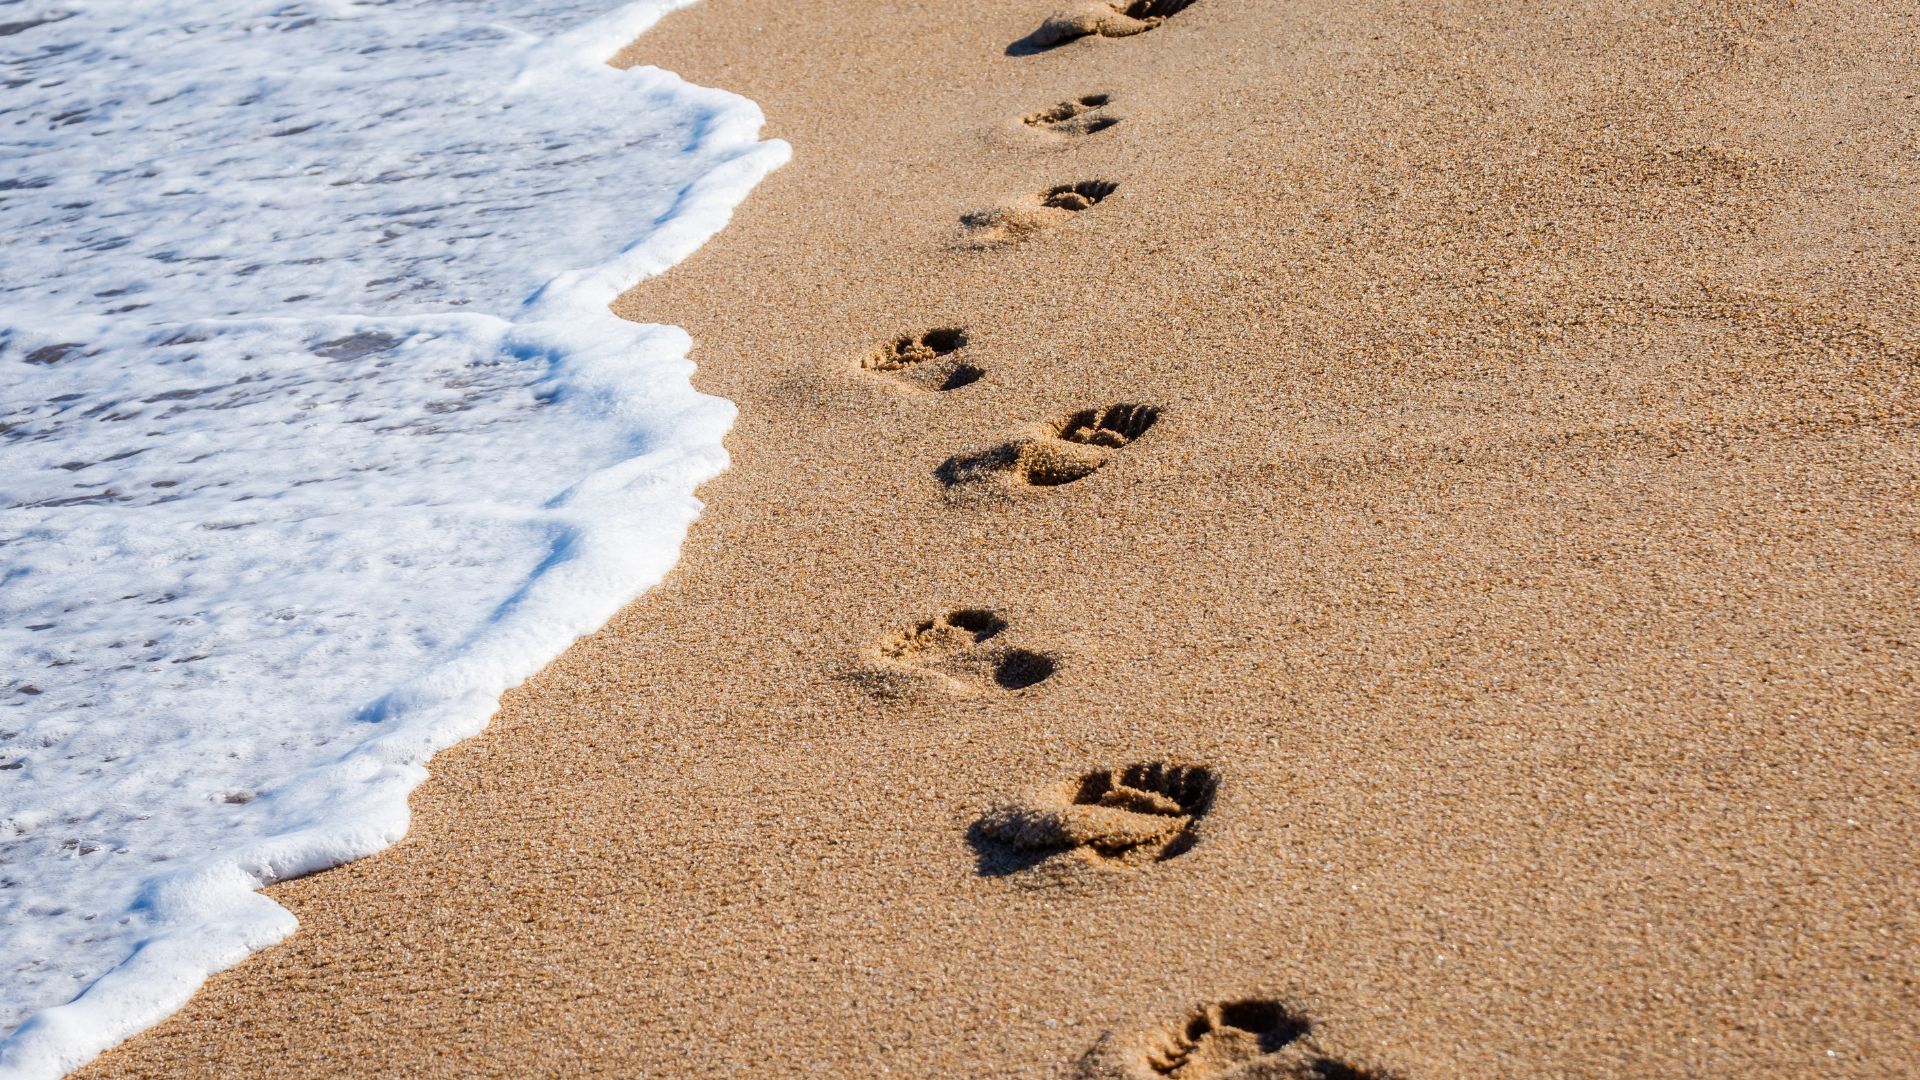 footprints on the beach with waves approaching